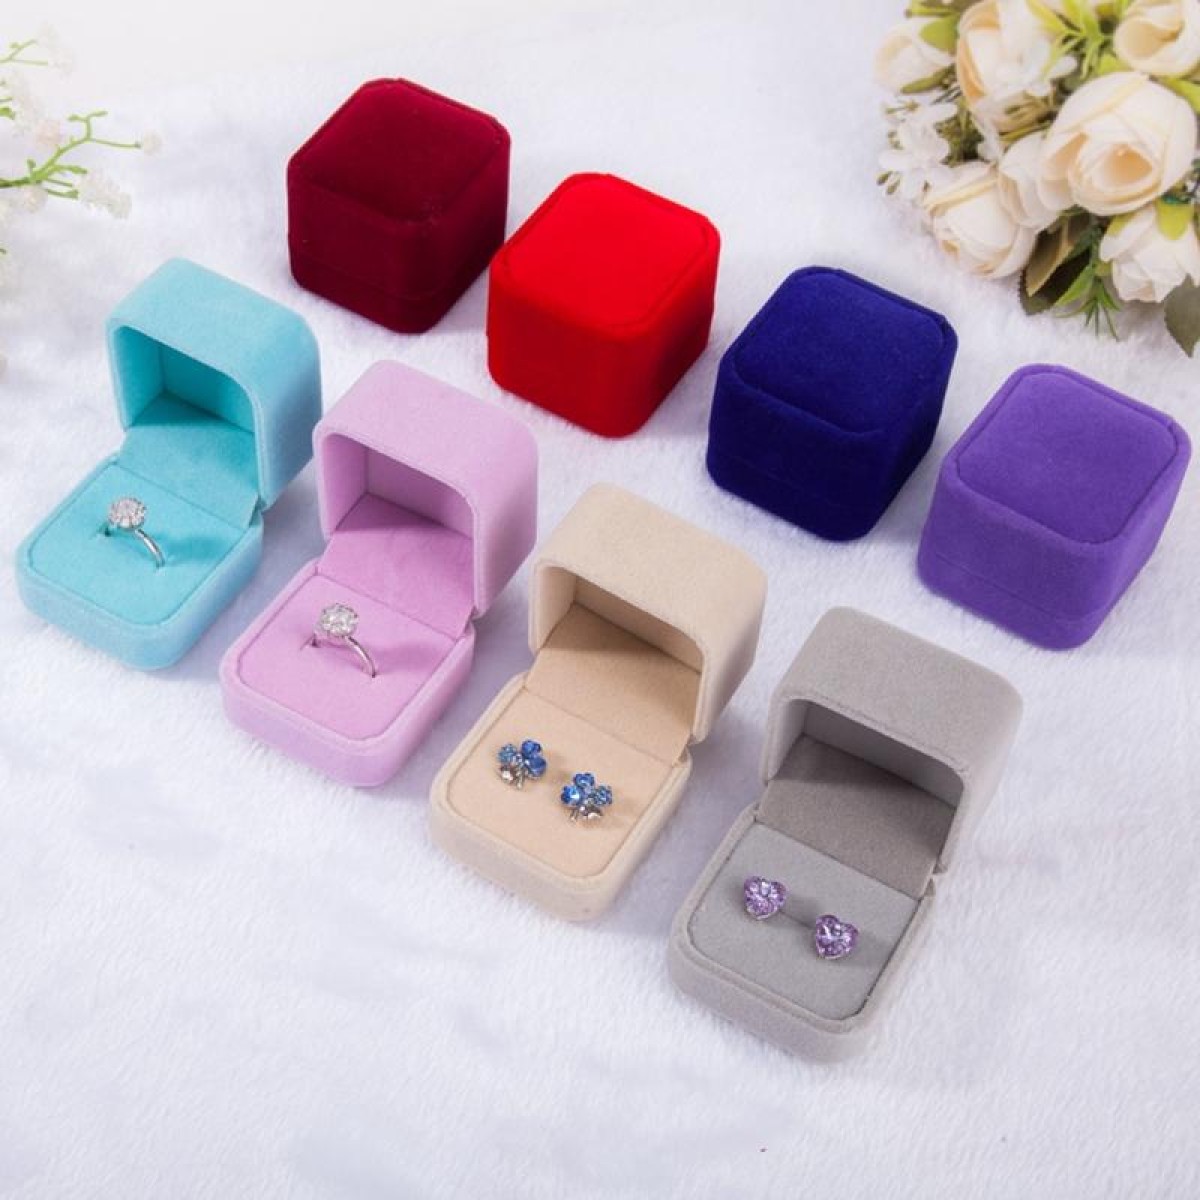 3 PCS Wedding Jewelry Accessories Square Velvet Jewelry Box Jewelry Display Case Gift Boxes Ring Earrings Box(Khaki)